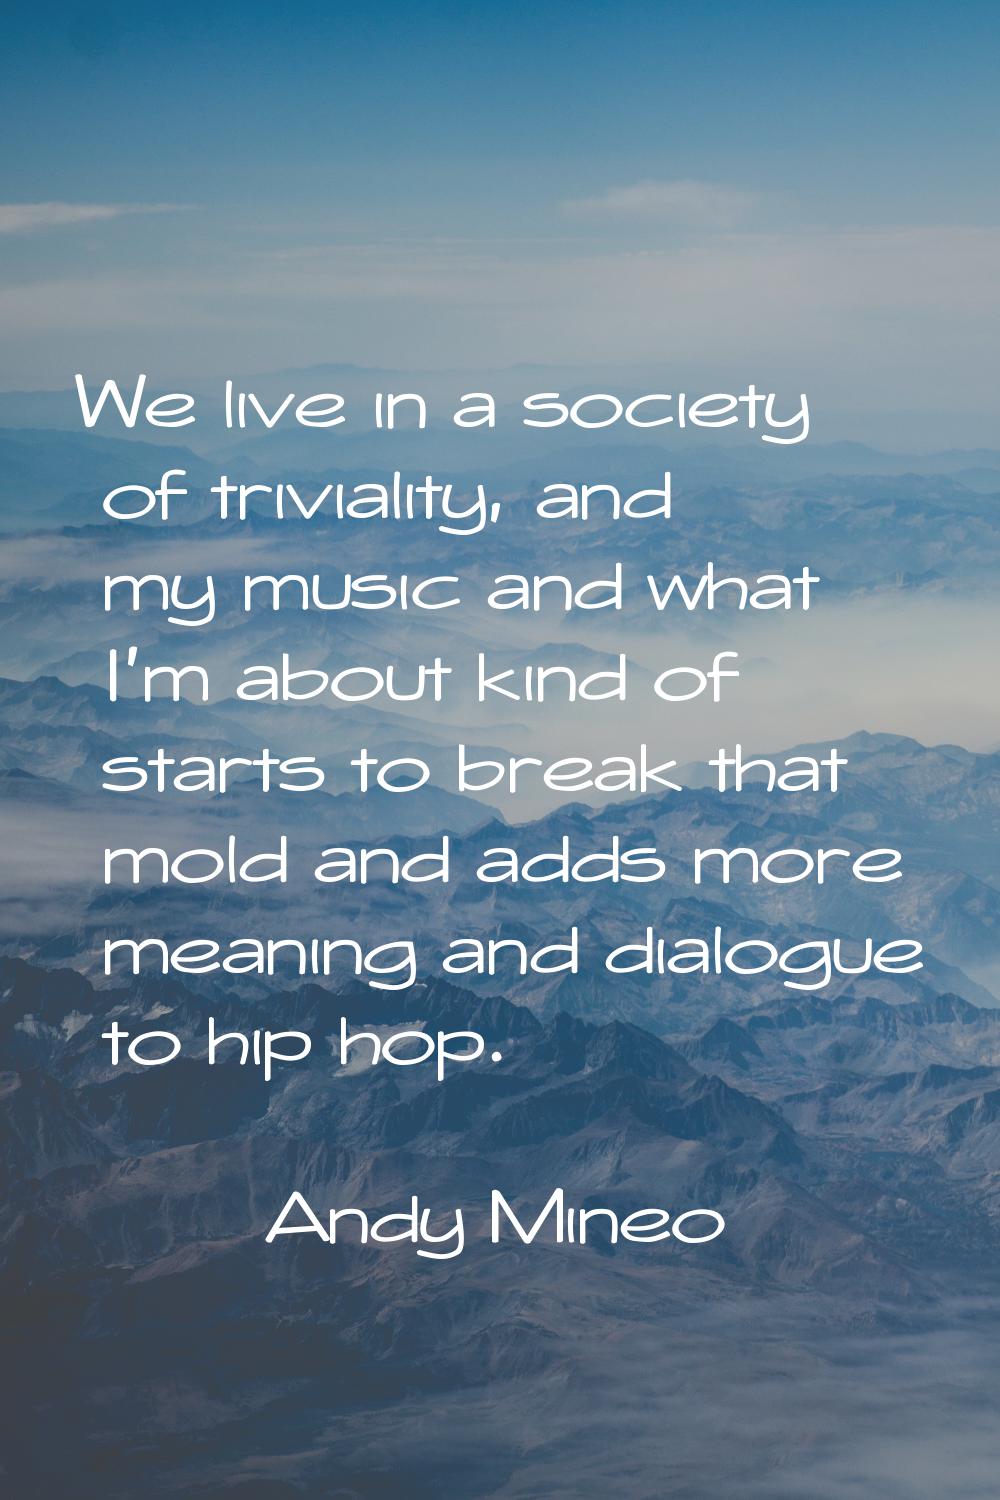 We live in a society of triviality, and my music and what I'm about kind of starts to break that mo